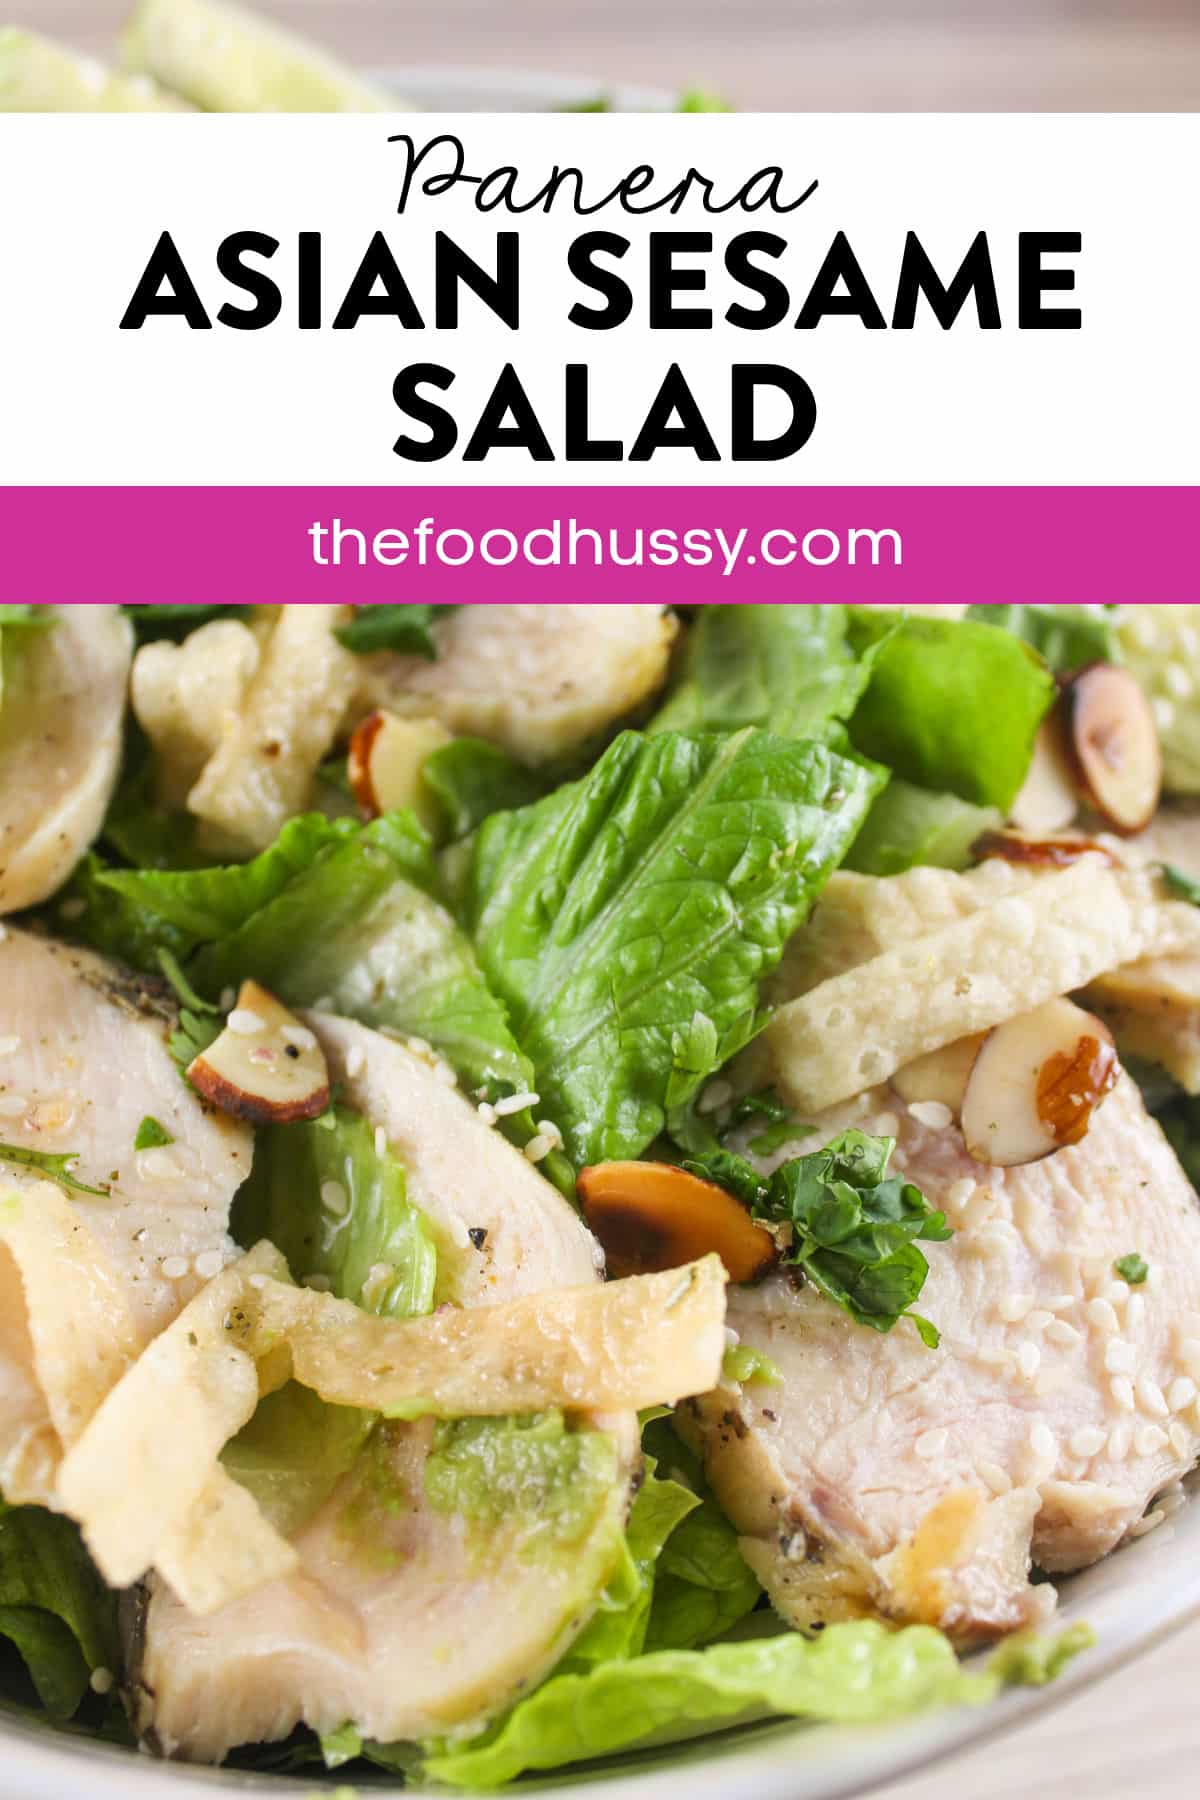 This Asian Sesame Salad from Panera is one of my favorite salads on their menu and it's so easy to make at home! Juicy slices of chicken, crunchy romaine lettuce, fresh cilantro, toasted almonds, sesame seeds and wonton strips (what a crunch!) tossed in a delicious and sweet Asian sesame vinaigrette. via @foodhussy